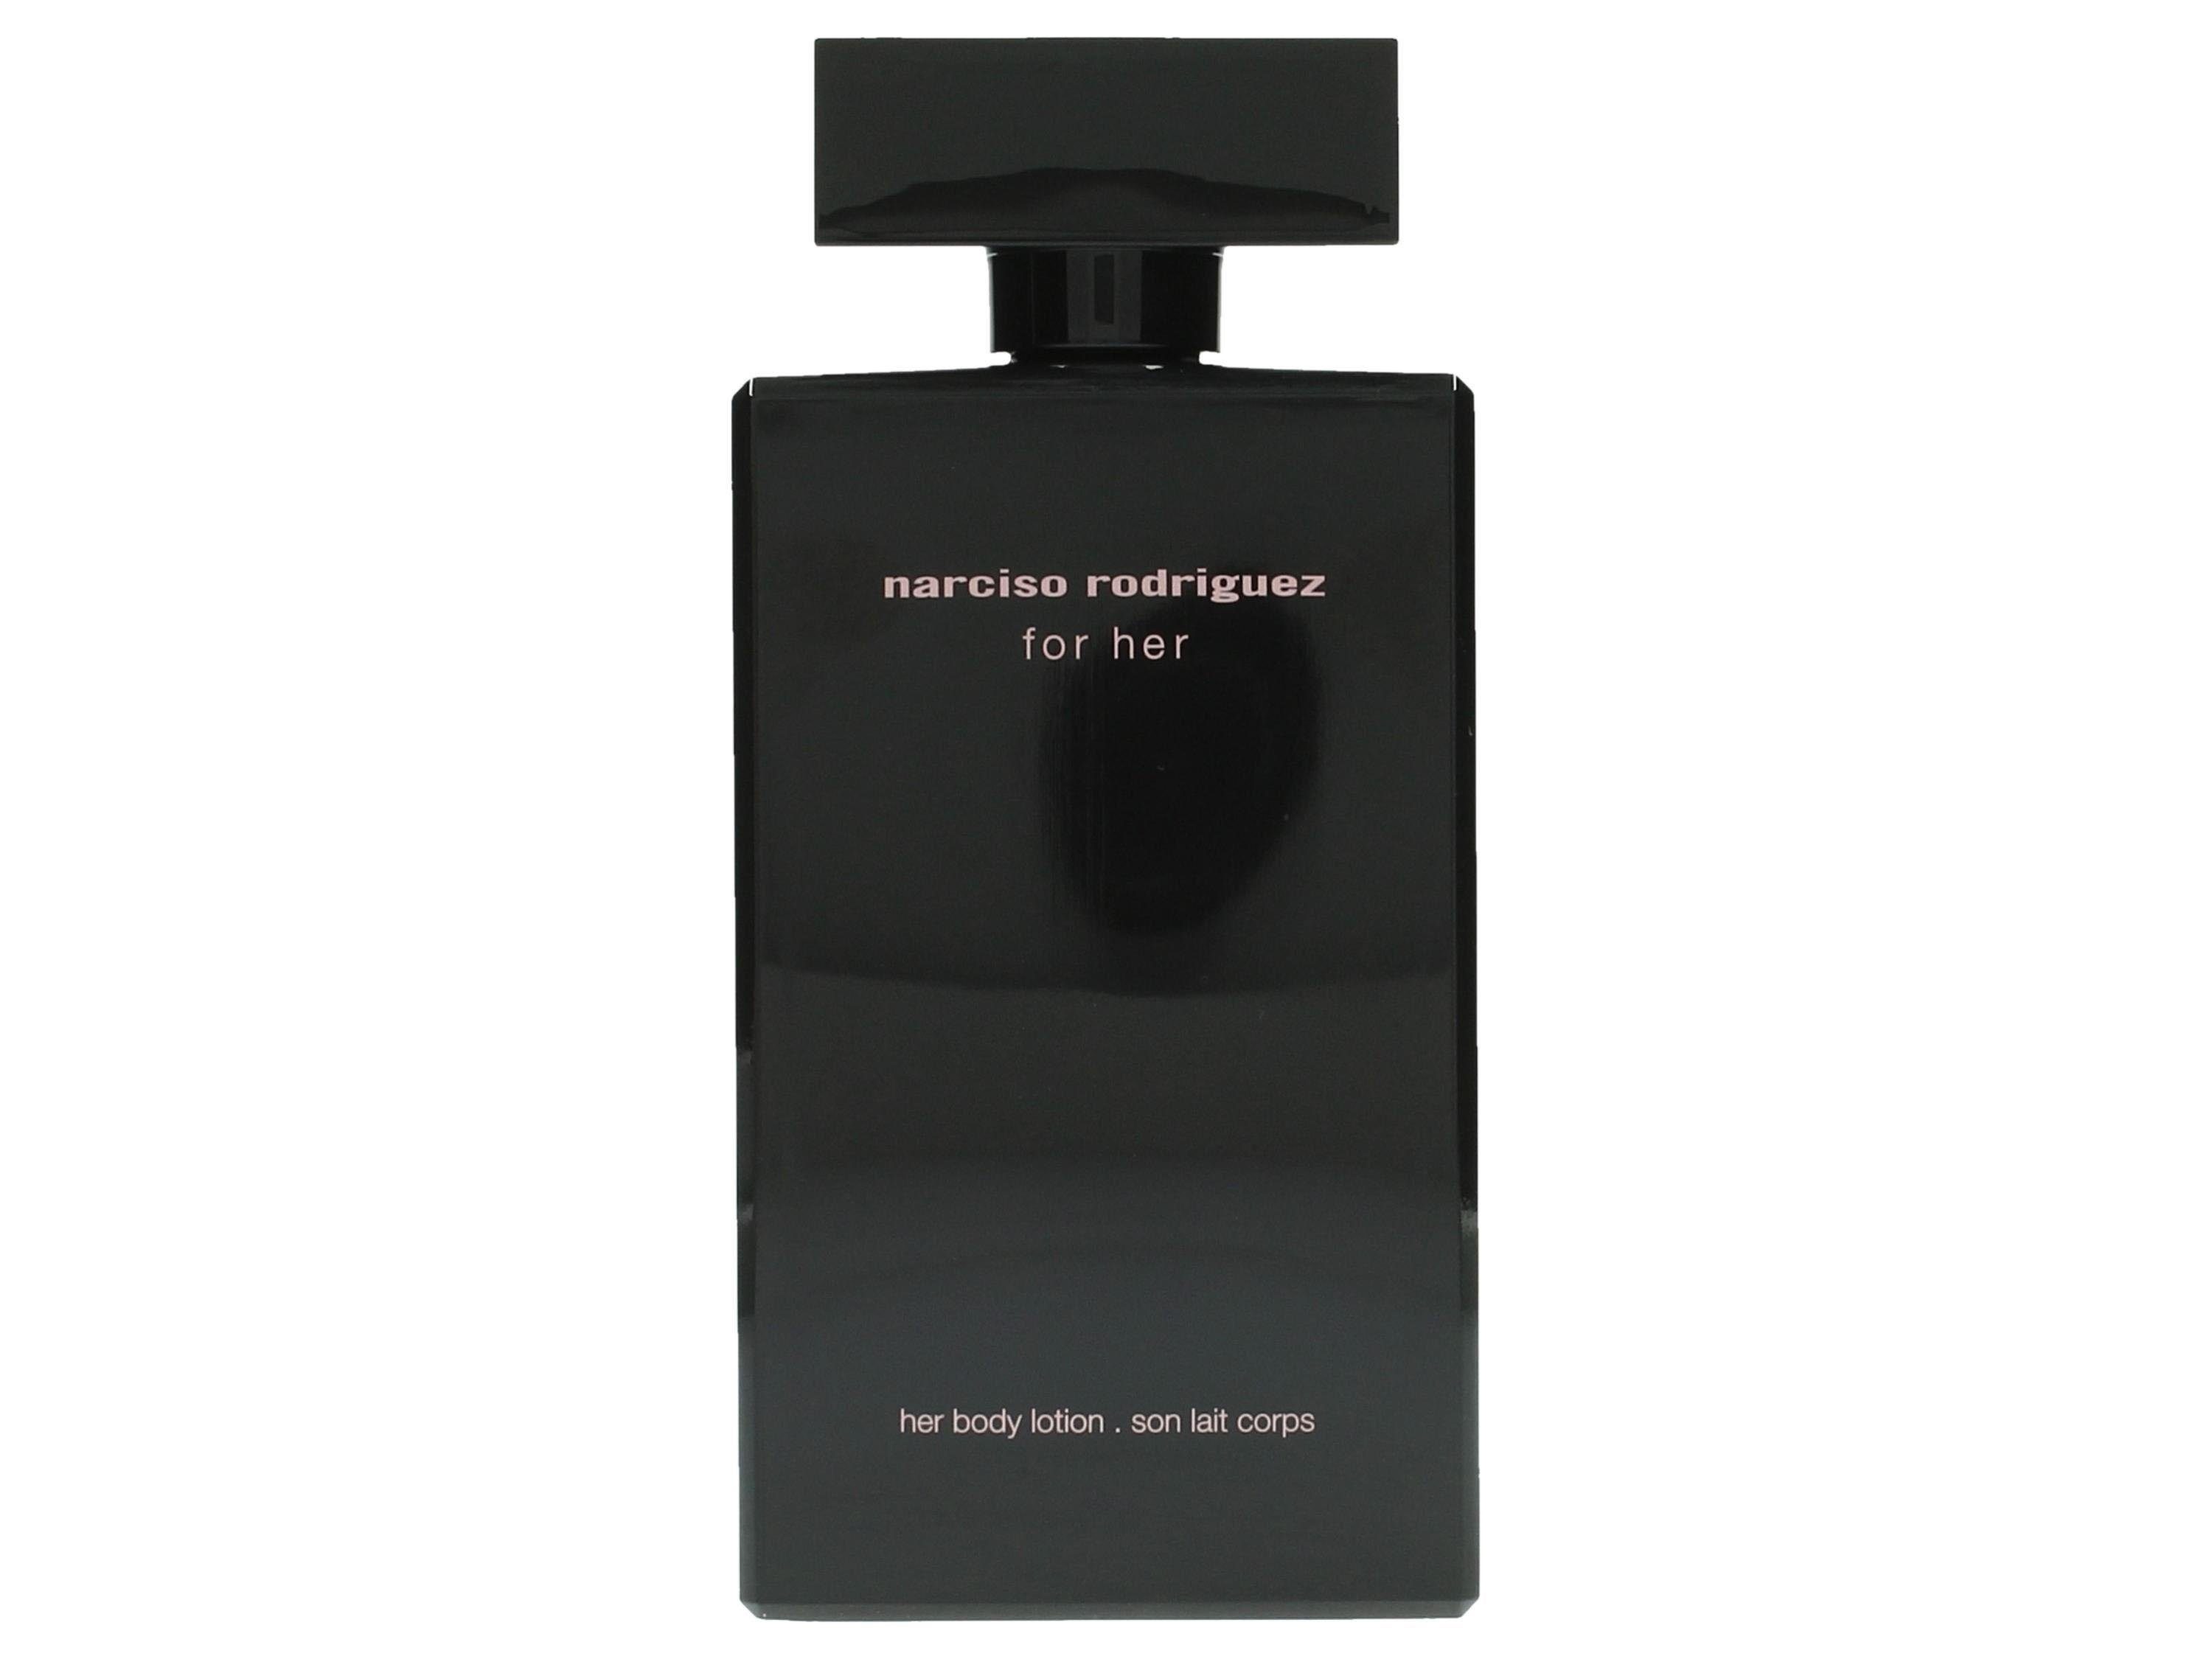 Her Bodylotion rodriguez For narciso